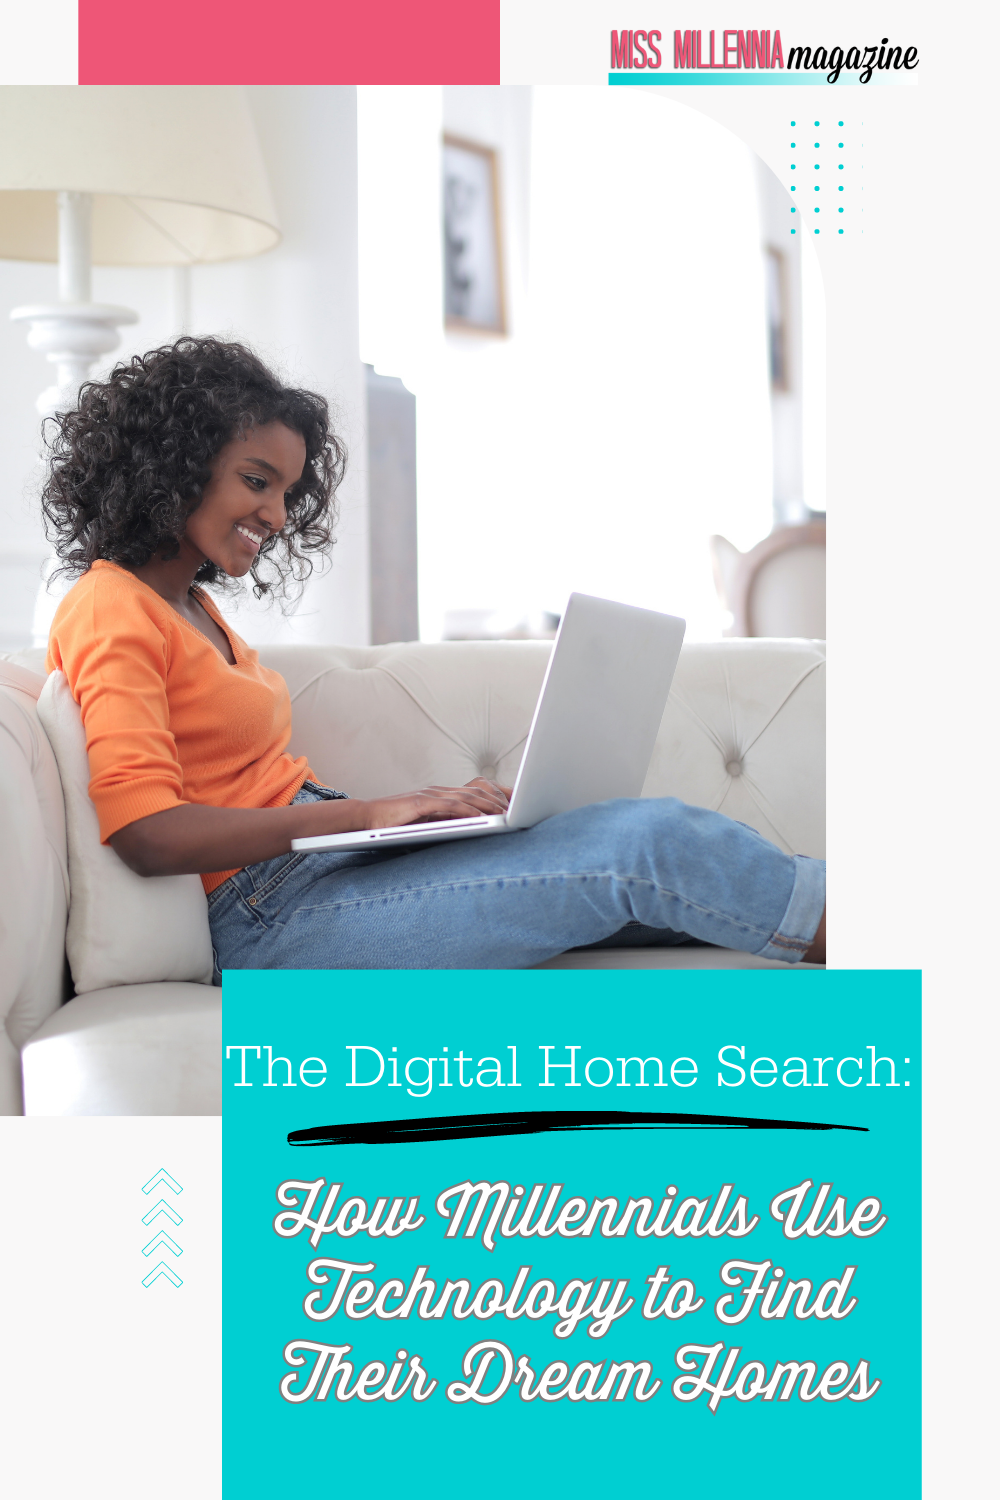 The Digital Home Search: How Millennials Use Technology to Find A Dream Home